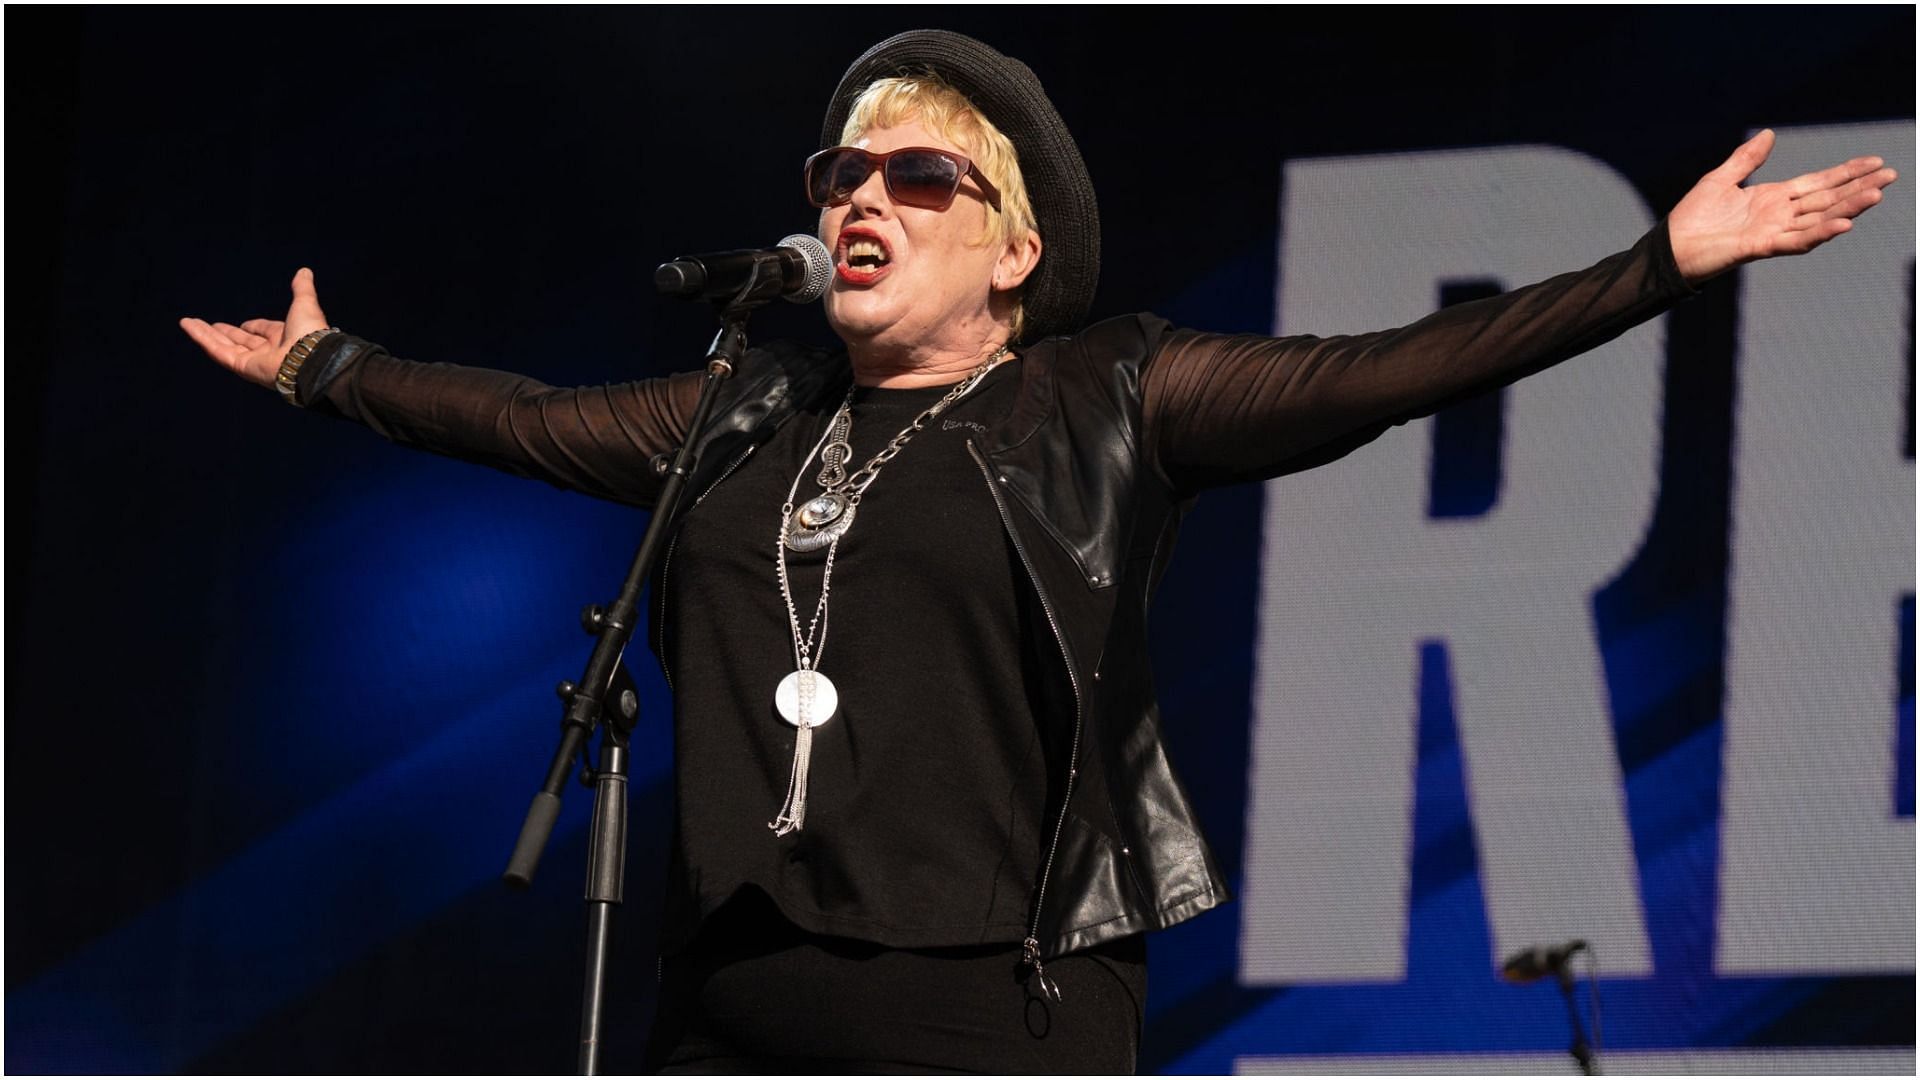 Hazel O&#039;Connor was put in an induced coma following a serious health issue (Image via Lorne Thomson/Getty Images)